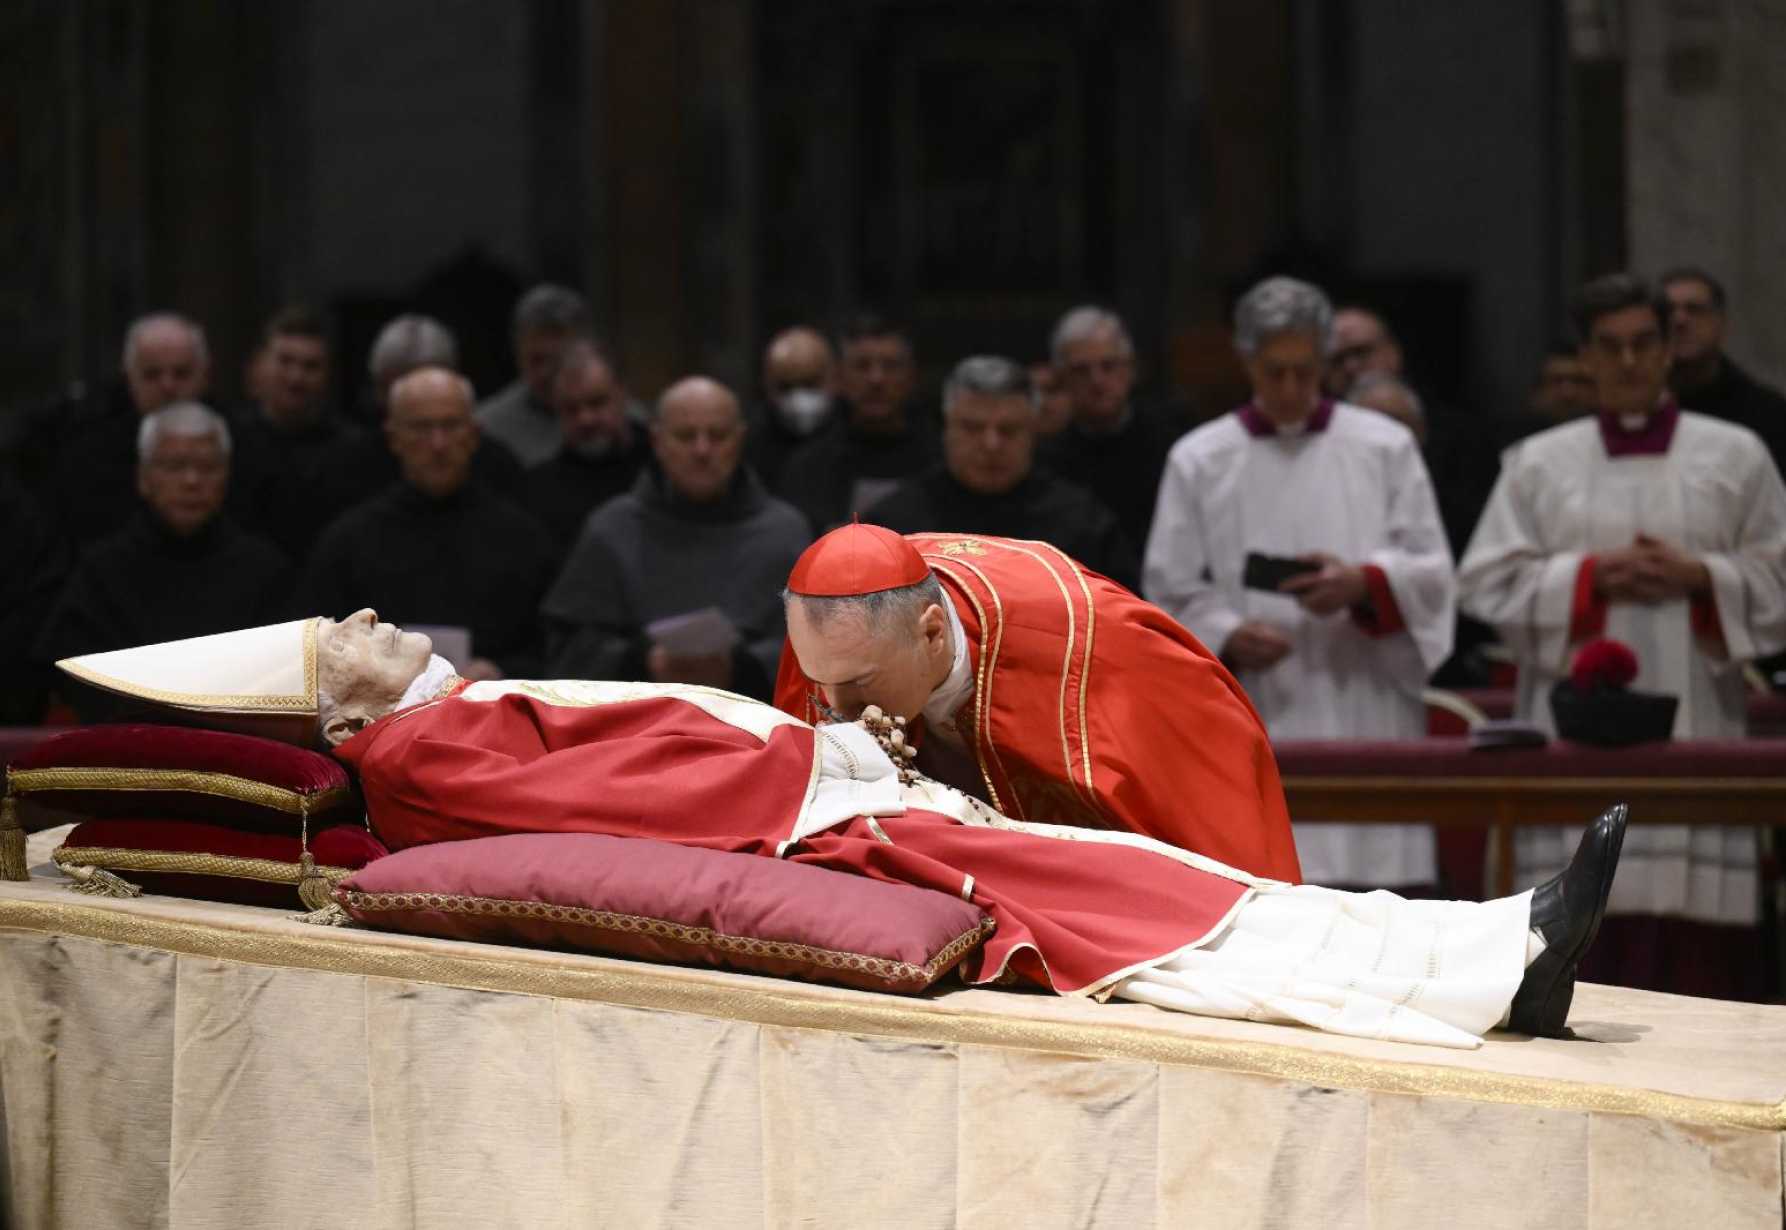 Pope Benedict's body solemnly, lovingly carried to St. Peter's Basilica